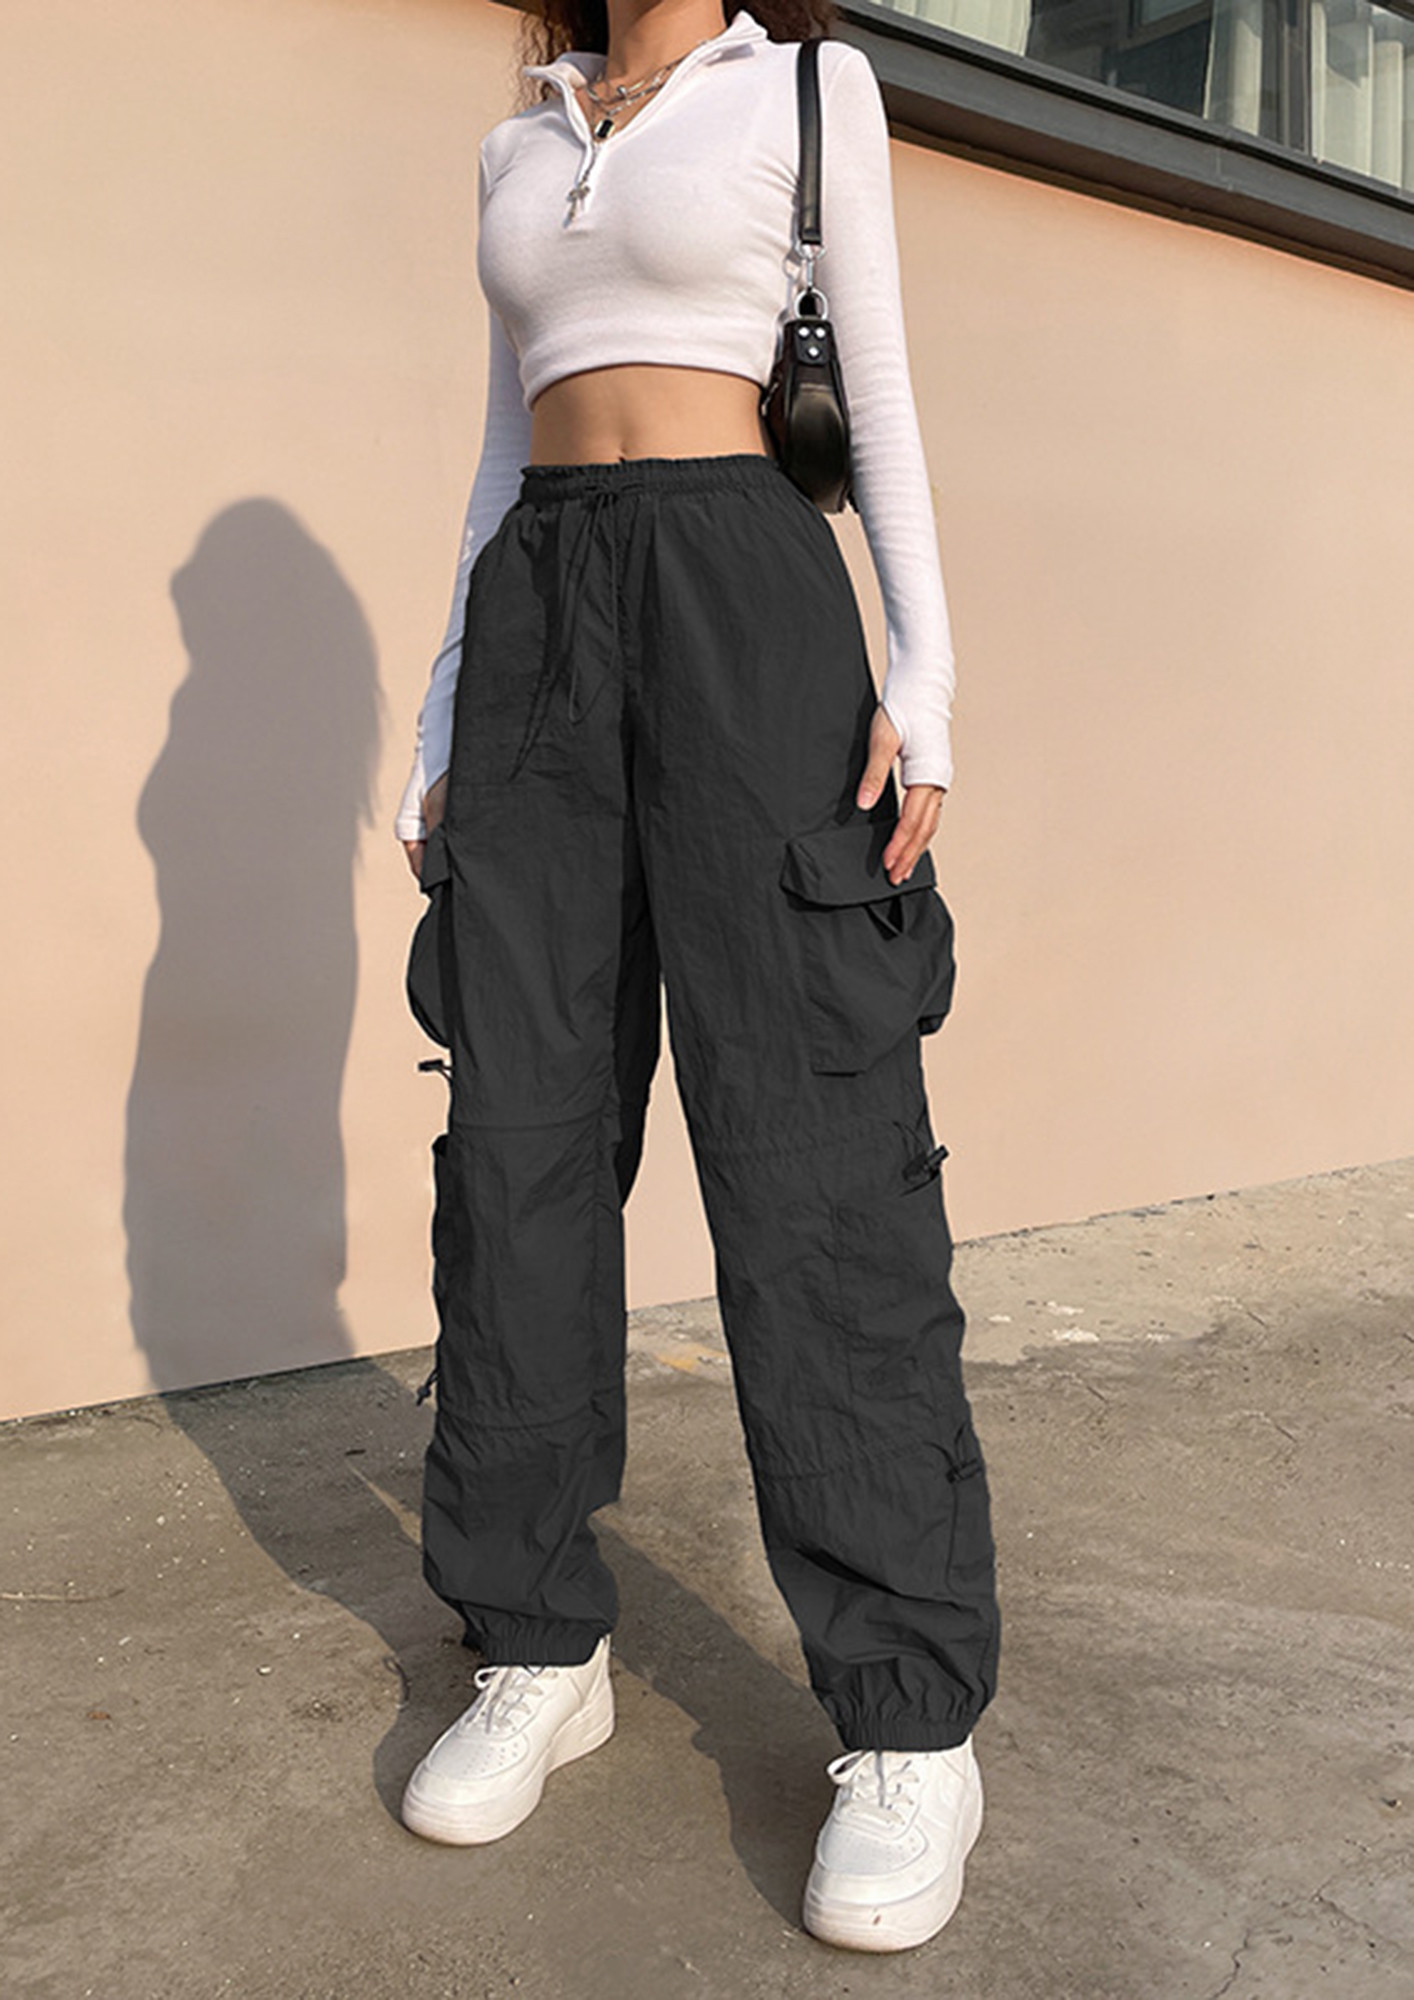 Aggregate more than 99 black cargo pants best